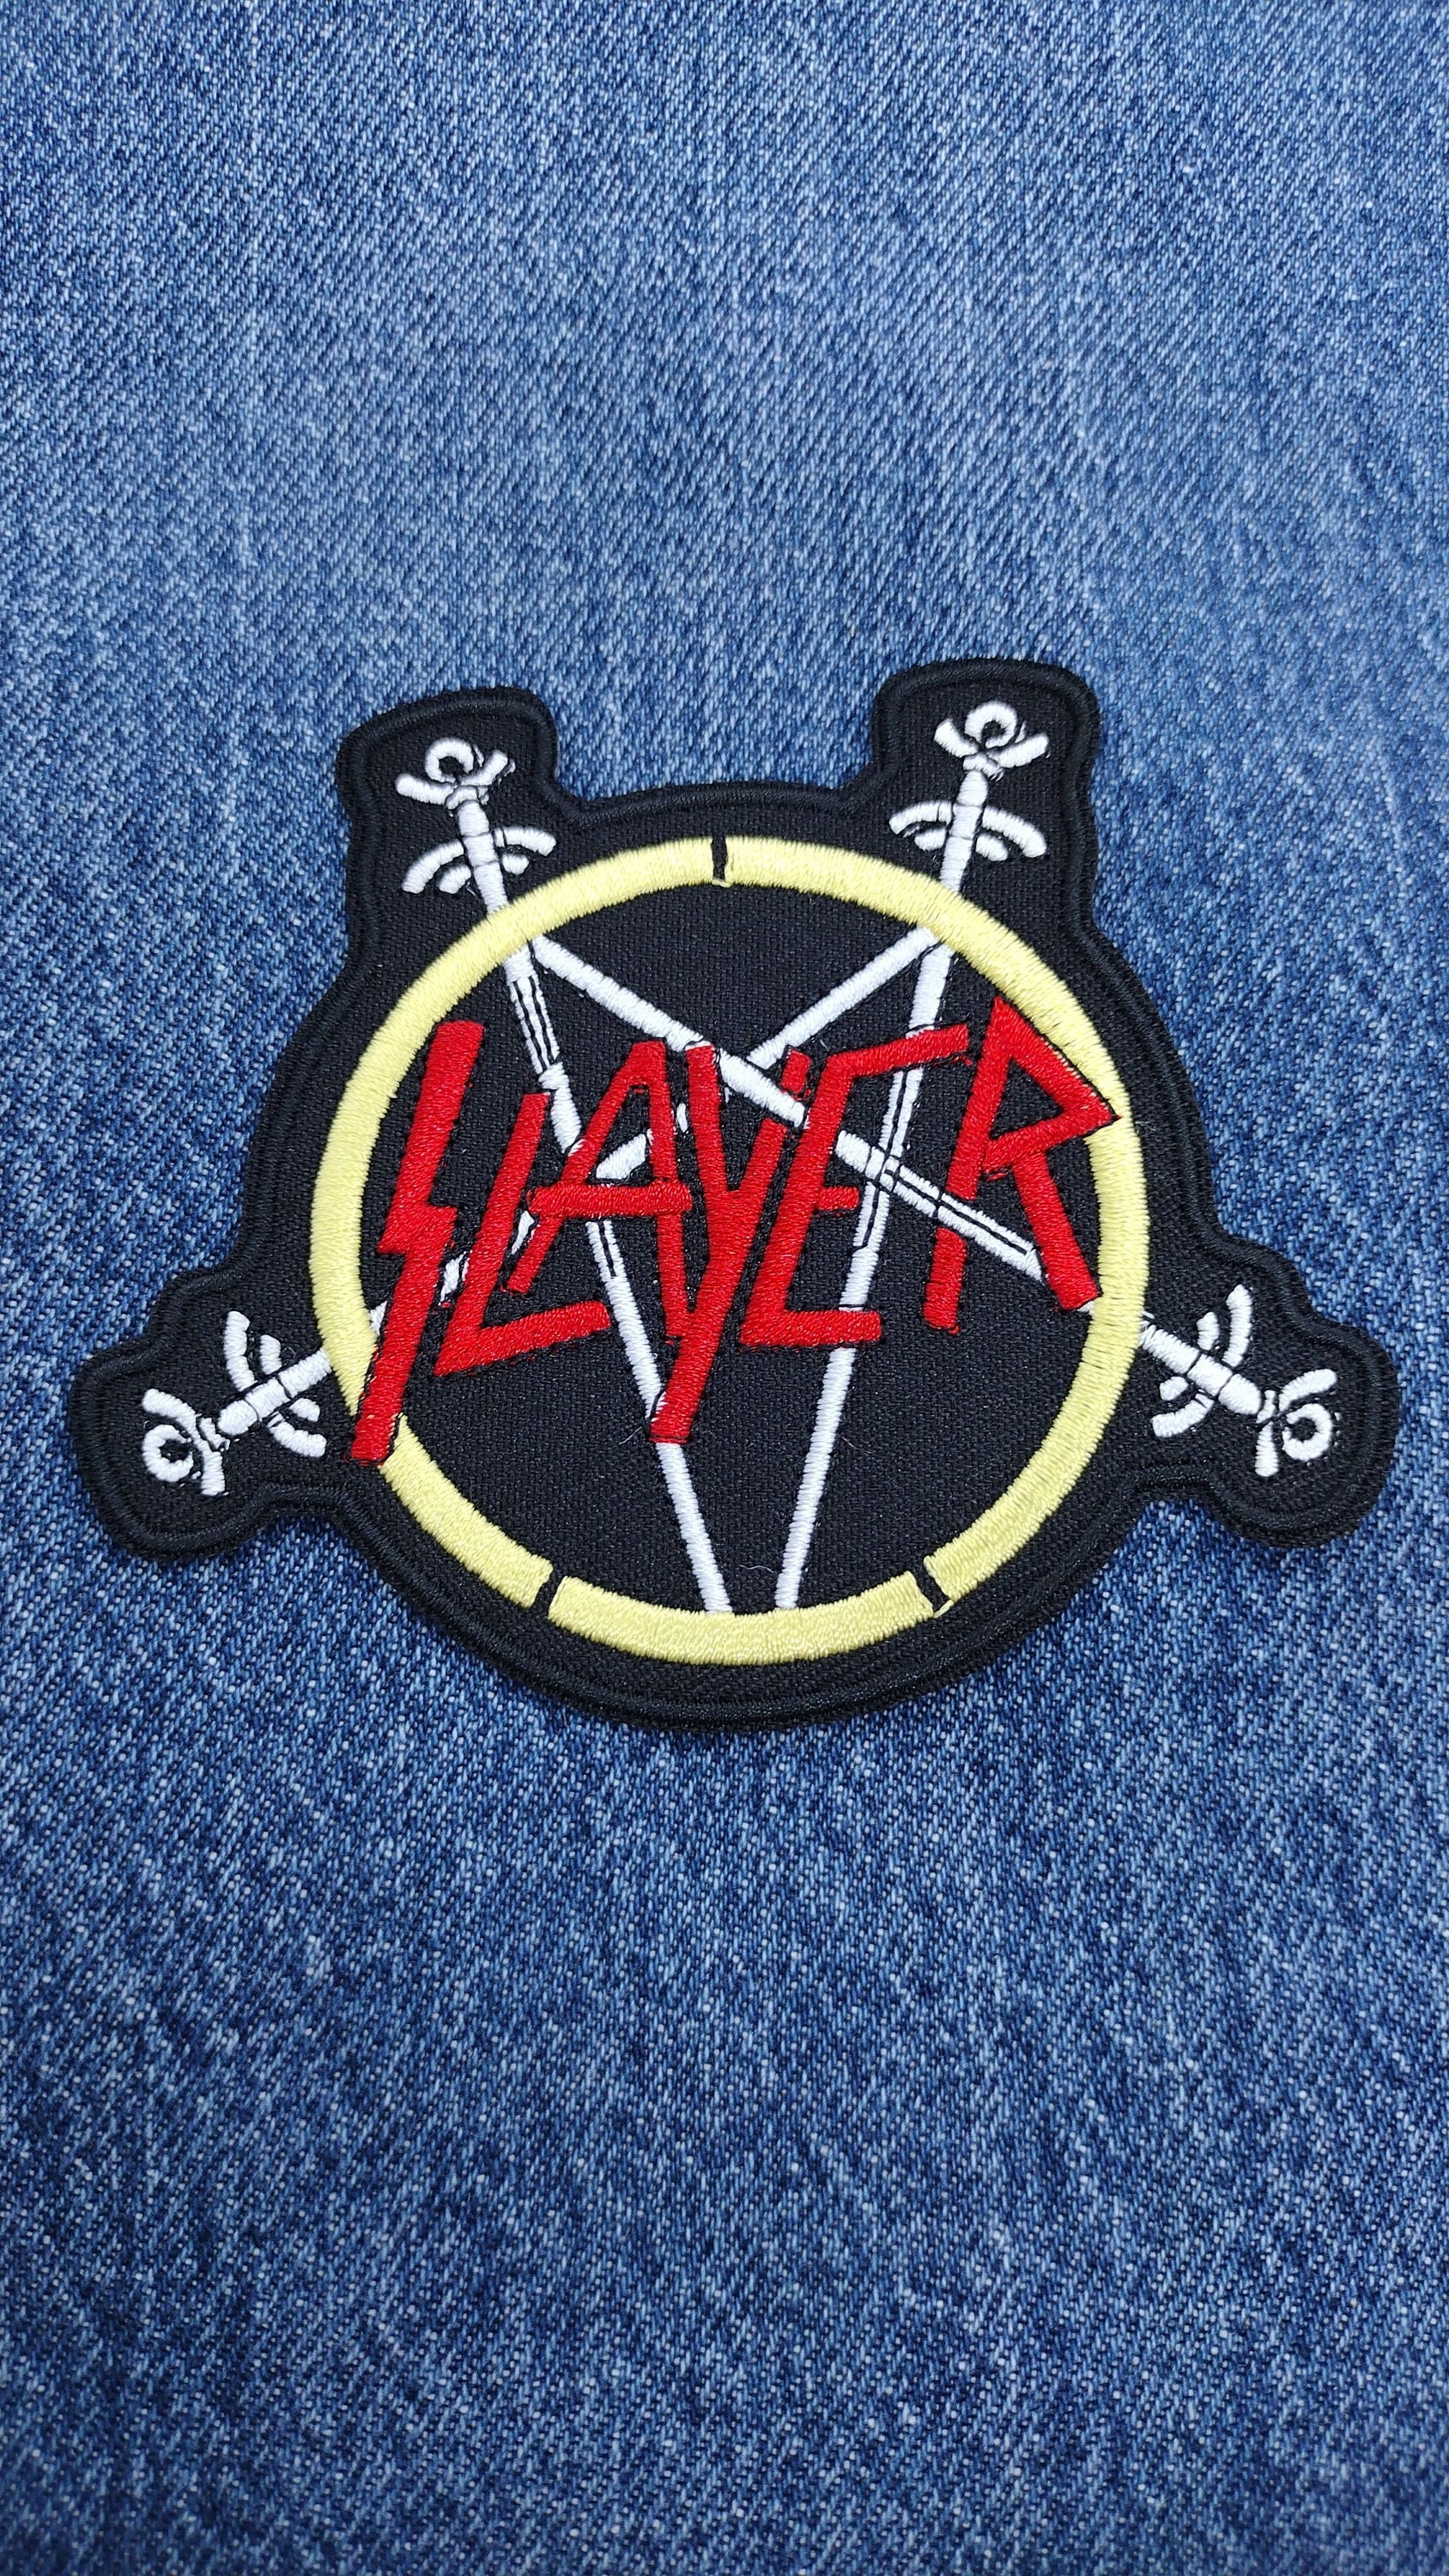 Slayer - Seasons In The Abyss Patch 10cm x 10cm